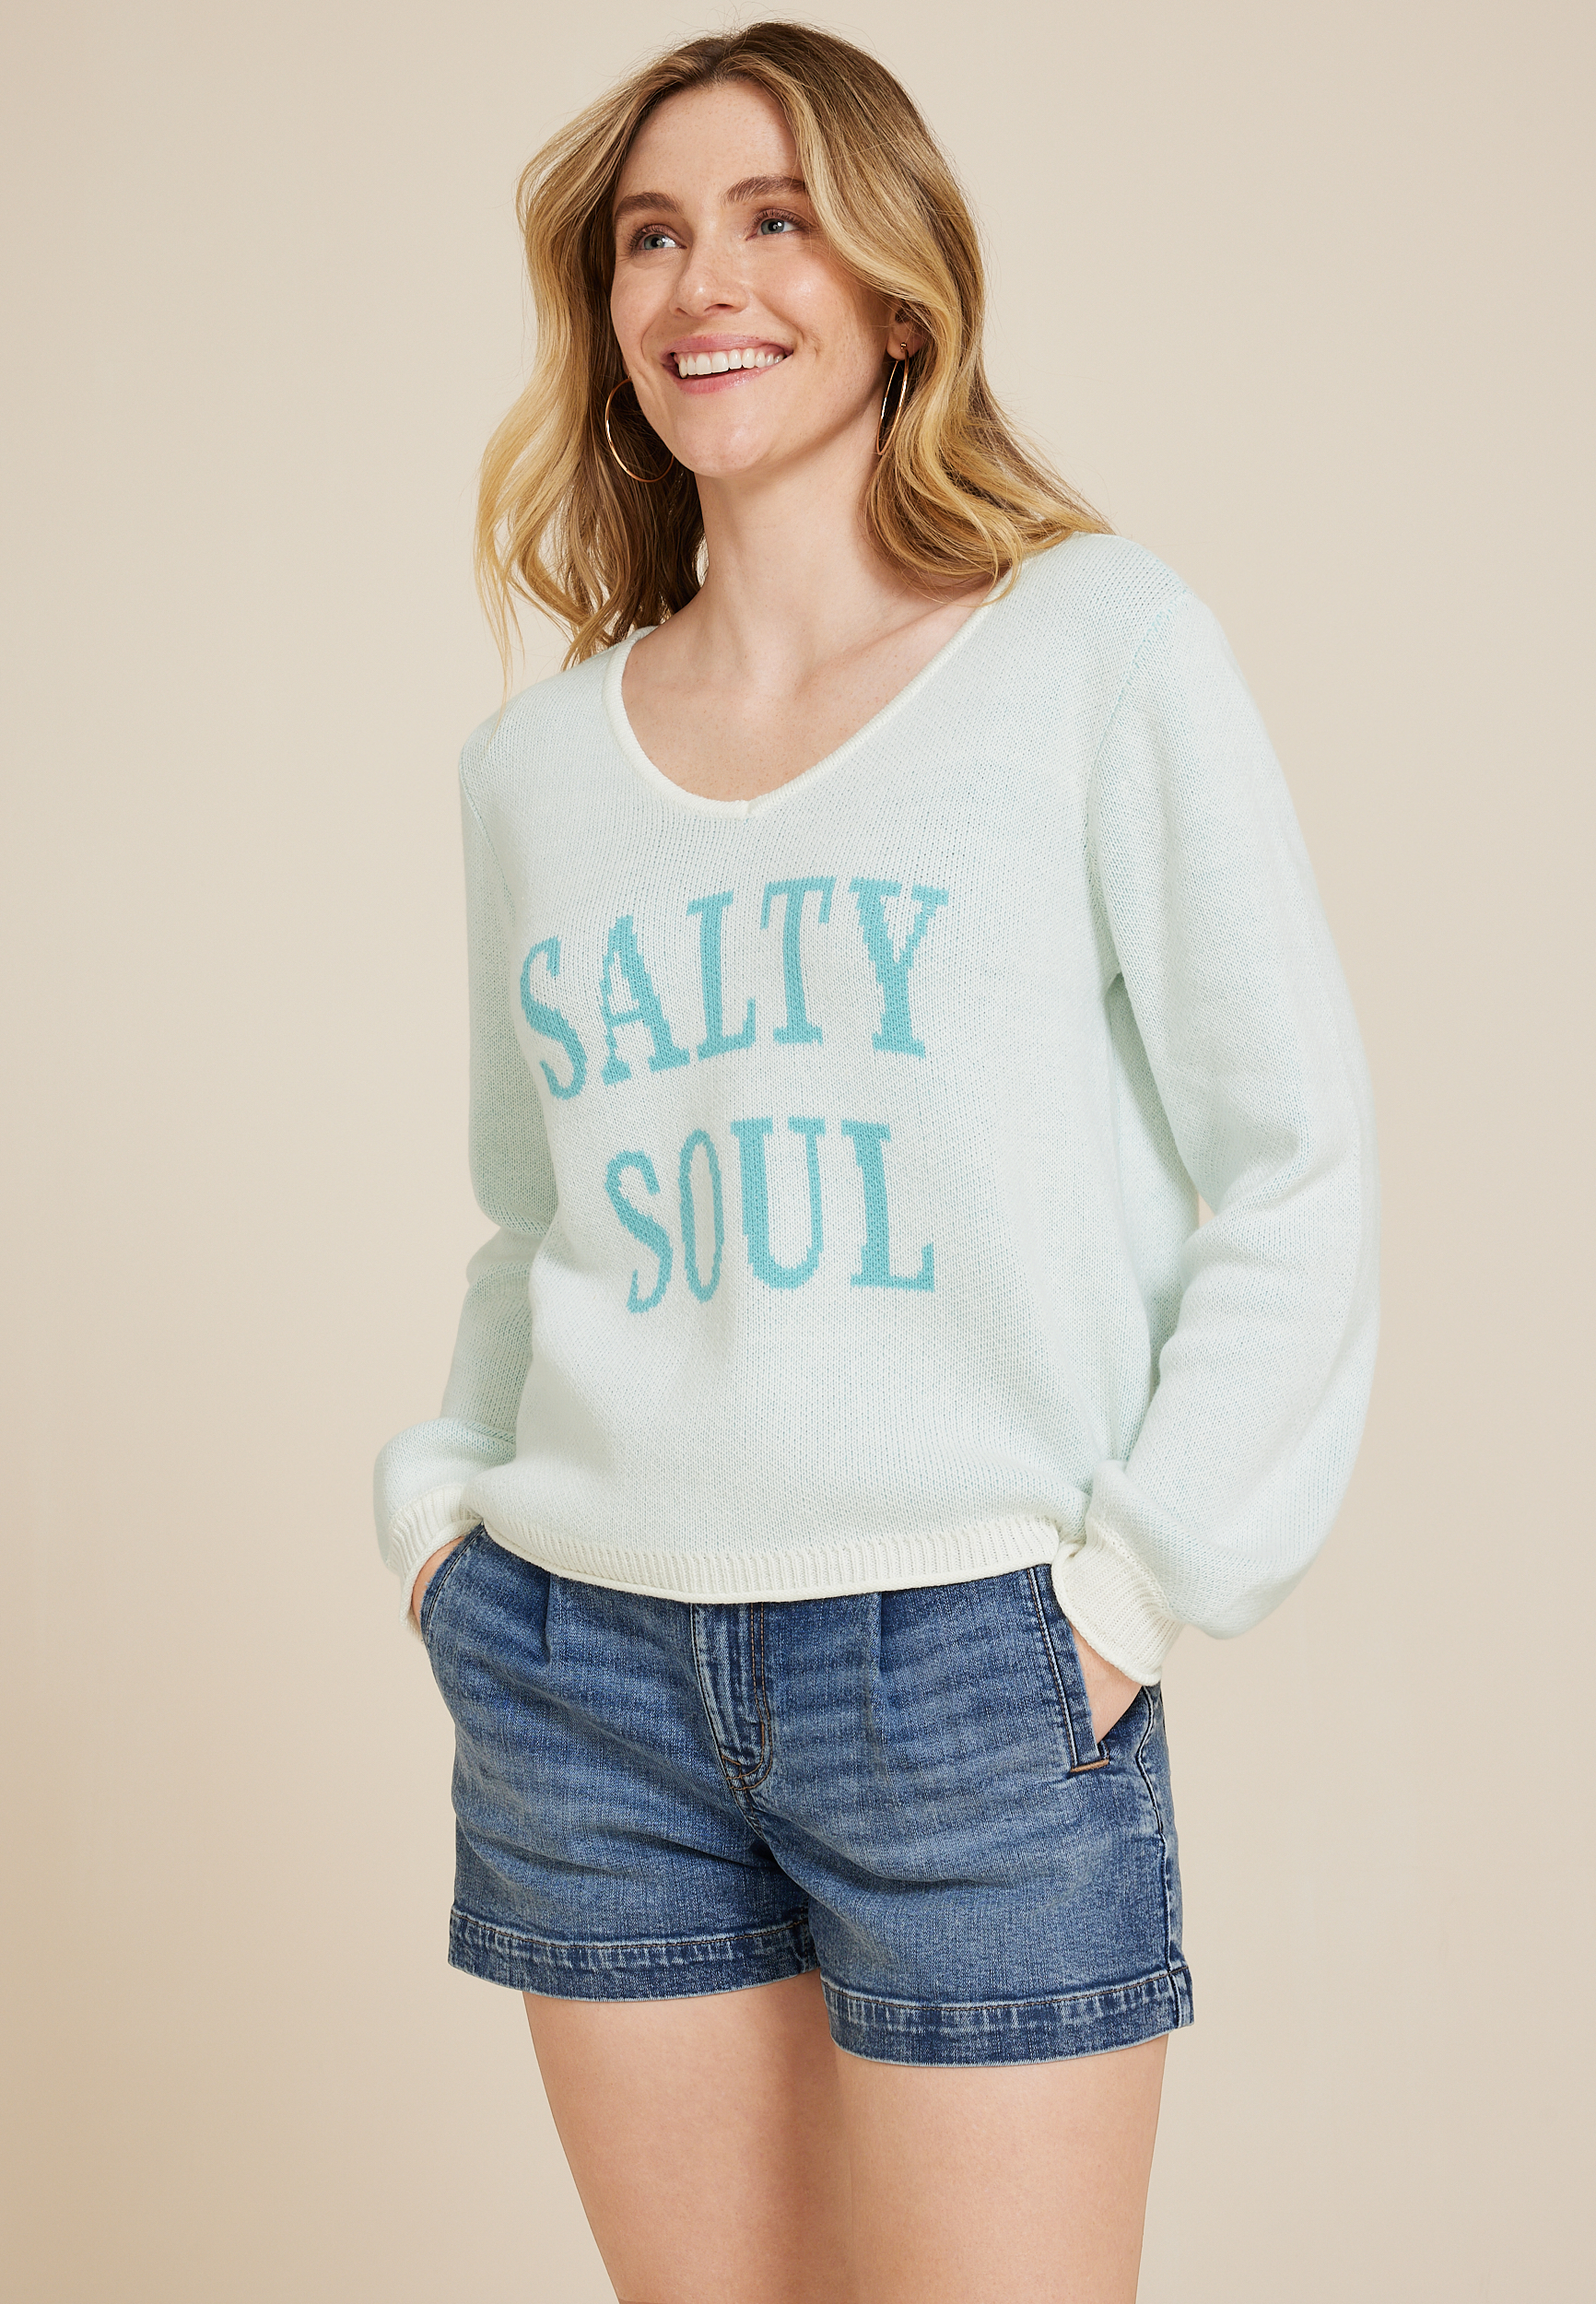 Salty Soul Sweater | maurices